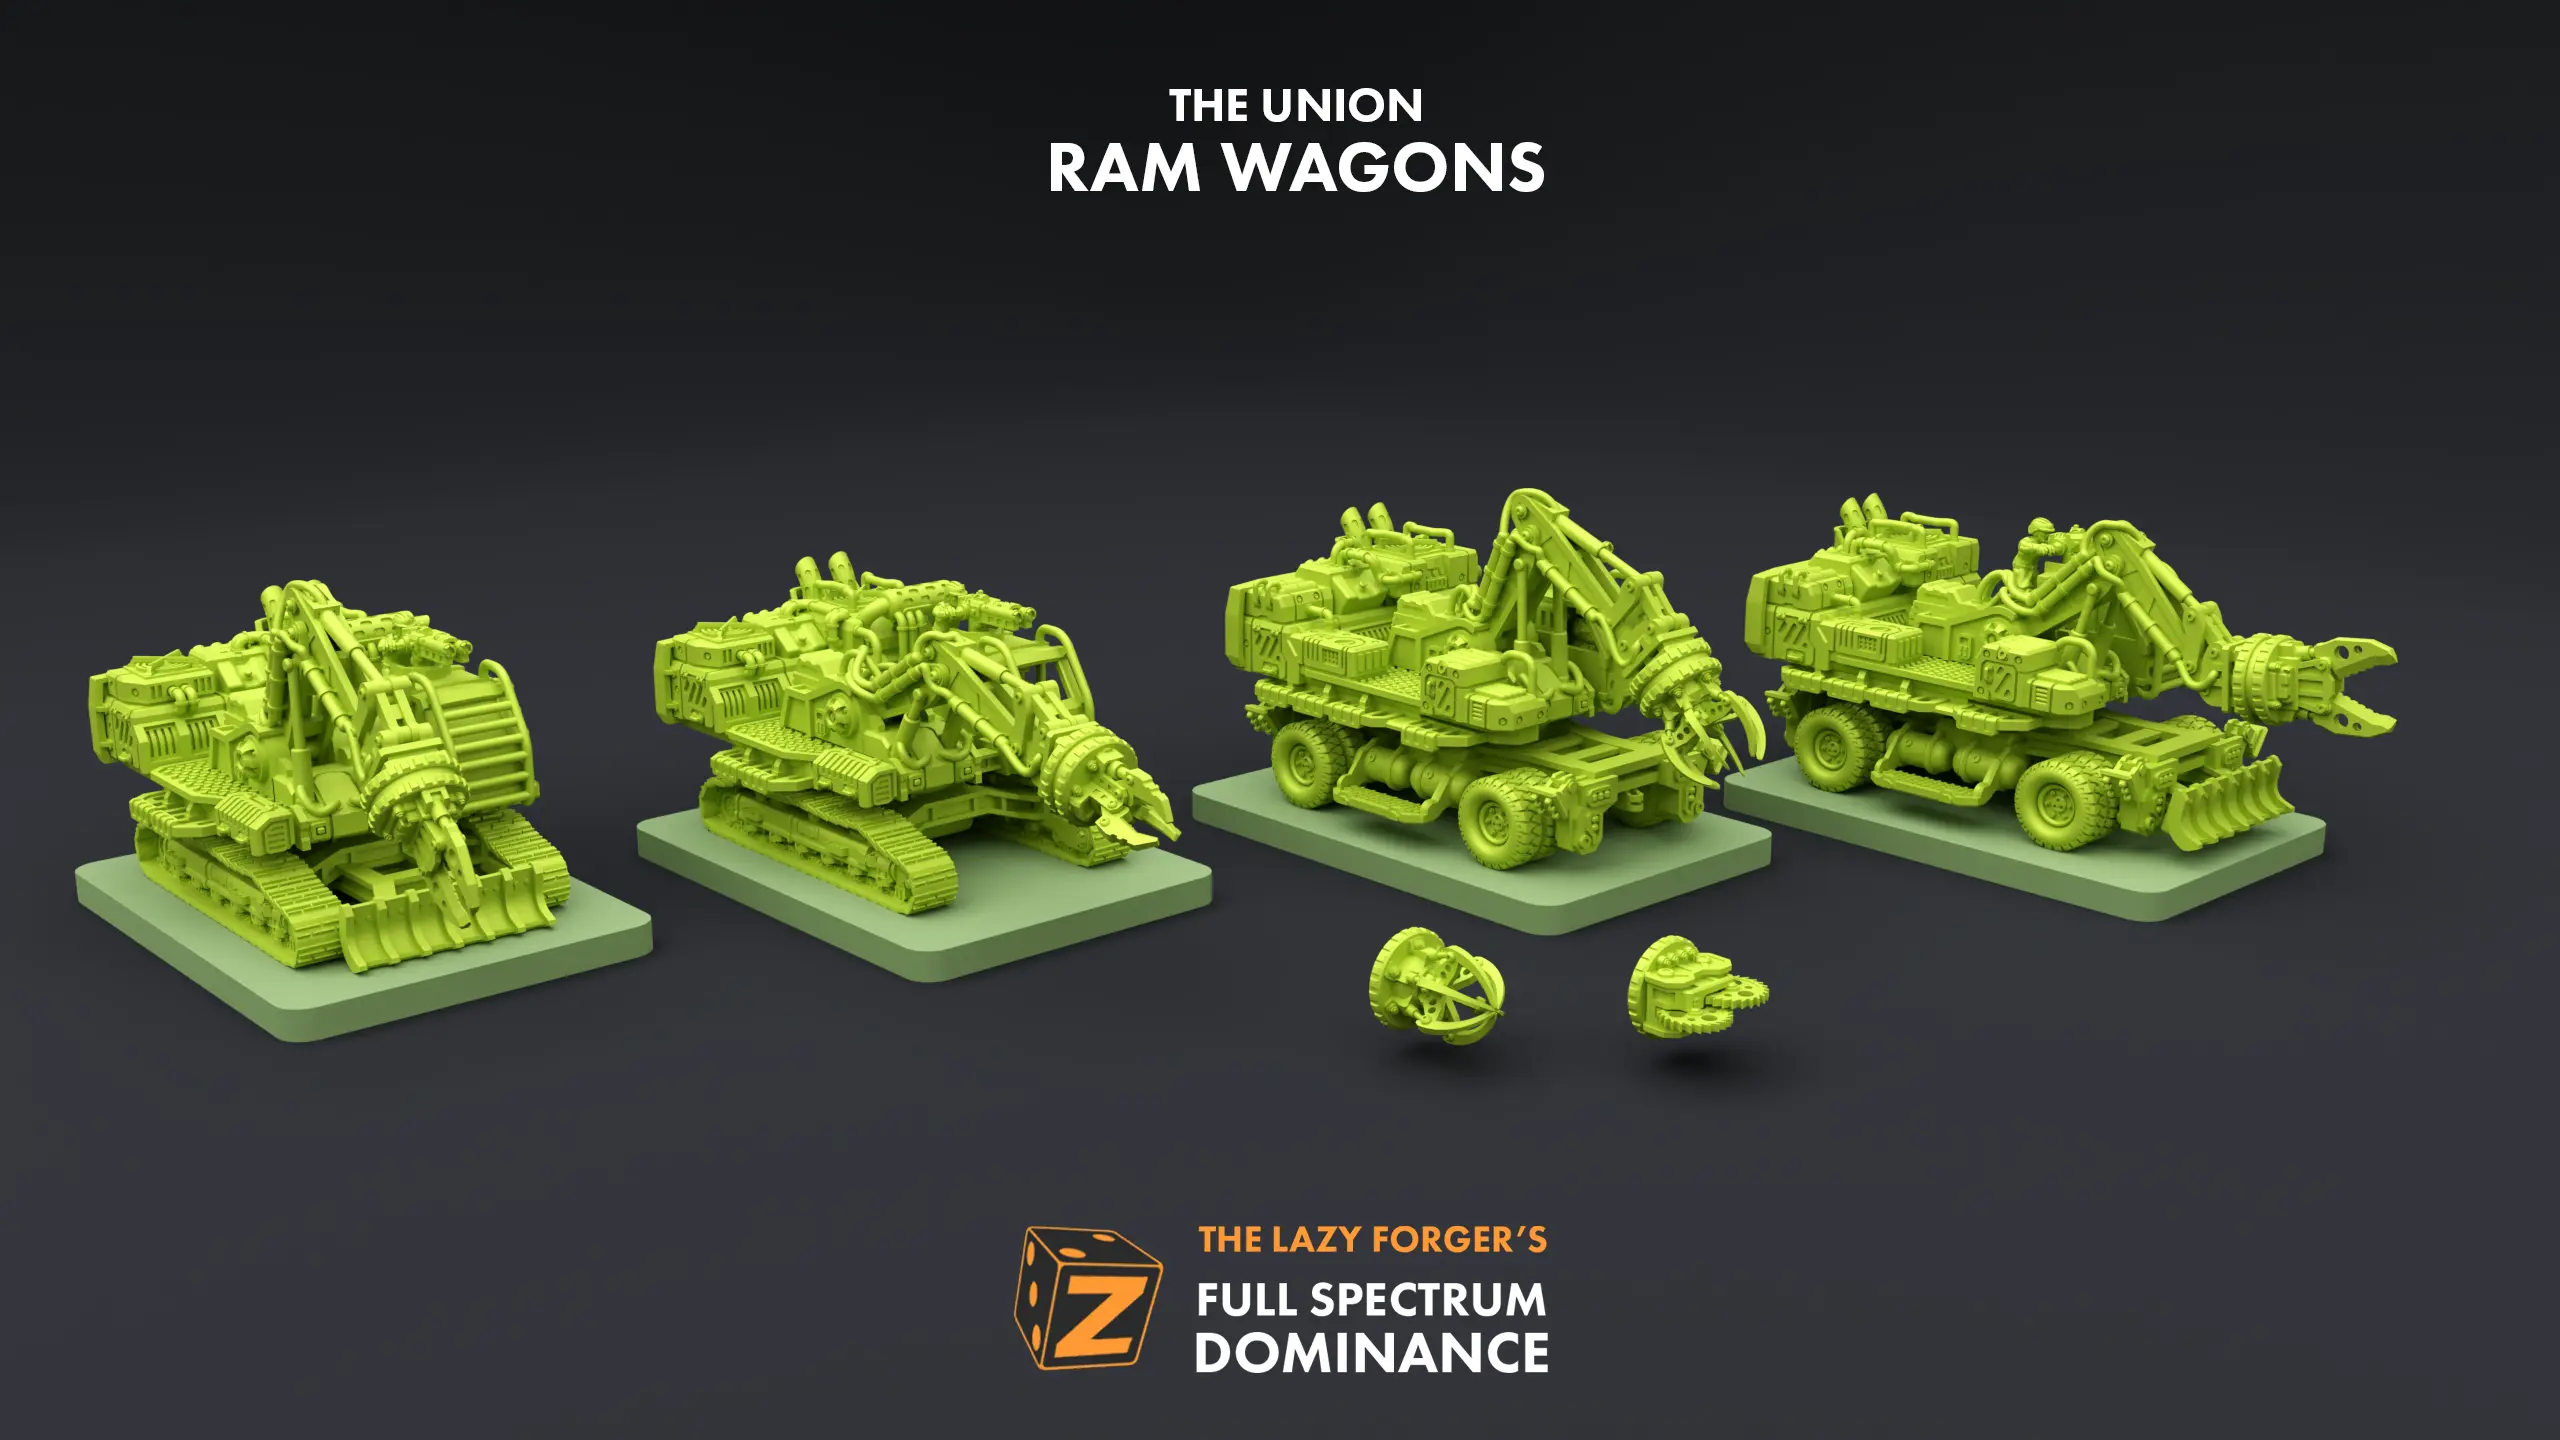 Ram Wagons (4) - The Union The Lazy Forger